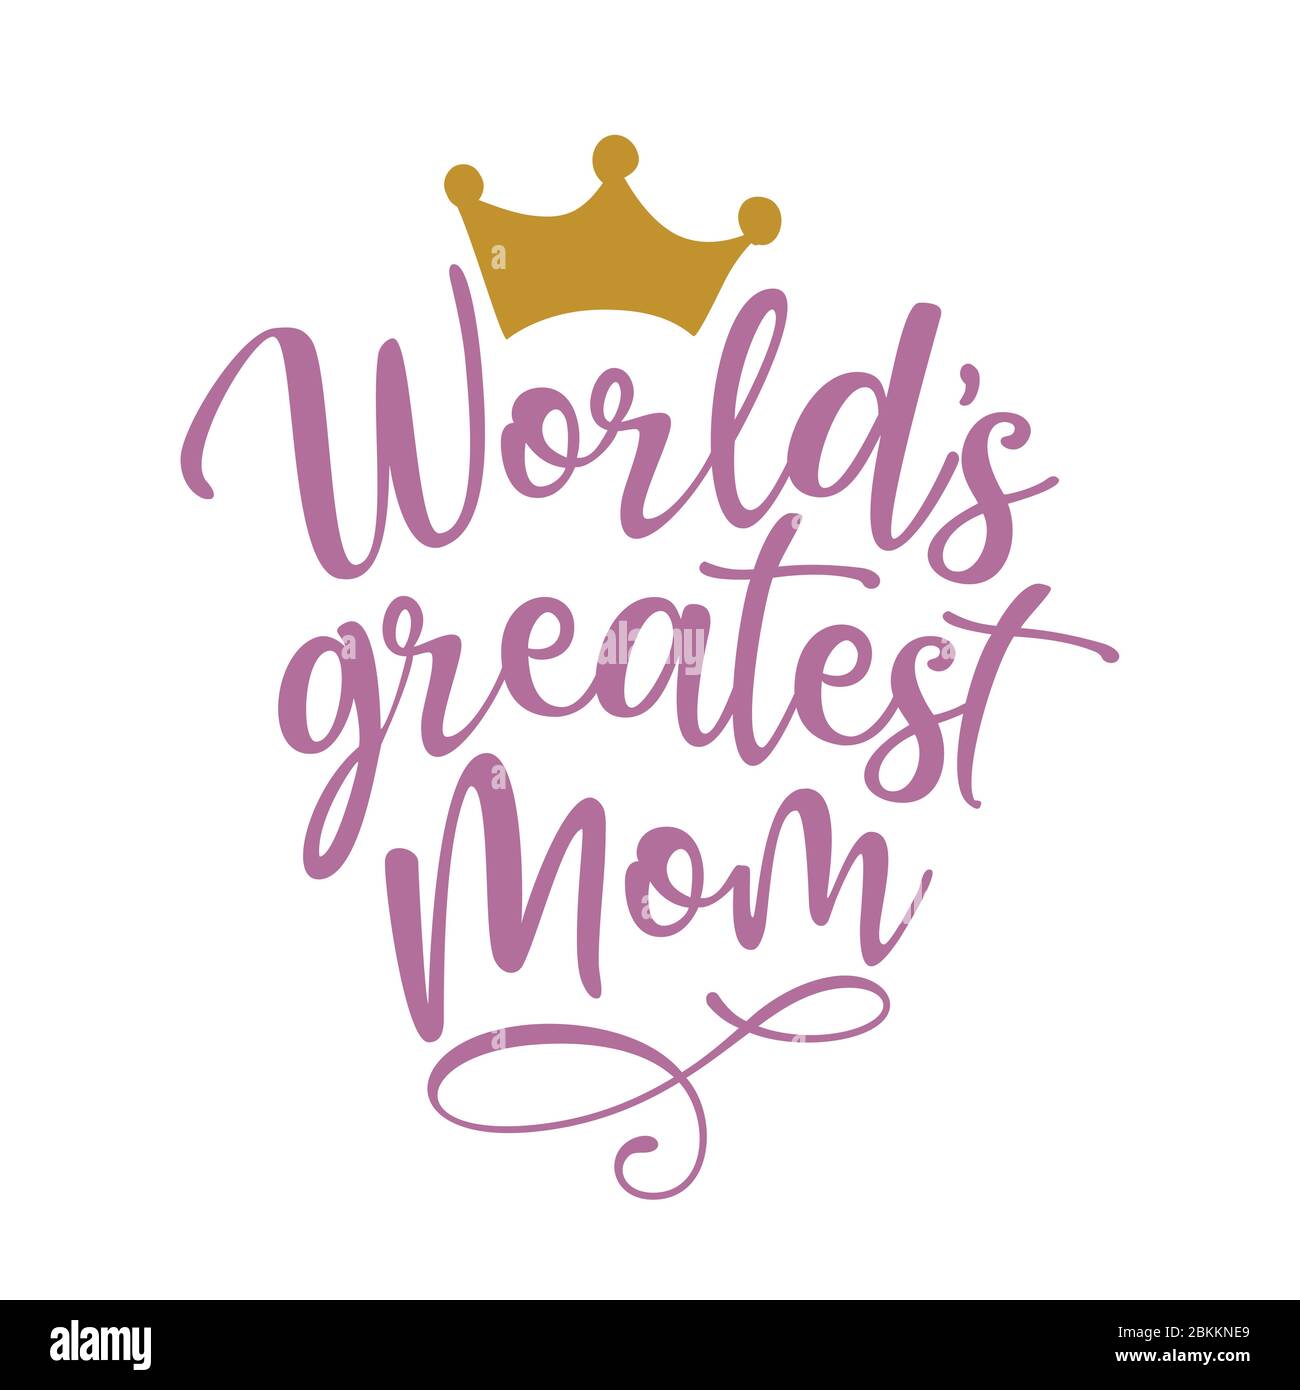 https://c8.alamy.com/comp/2BKKNE9/worlds-greatest-mom-happy-mothers-day-lettering-handmade-calligraphy-vector-illustration-mothers-day-card-with-crown-2BKKNE9.jpg